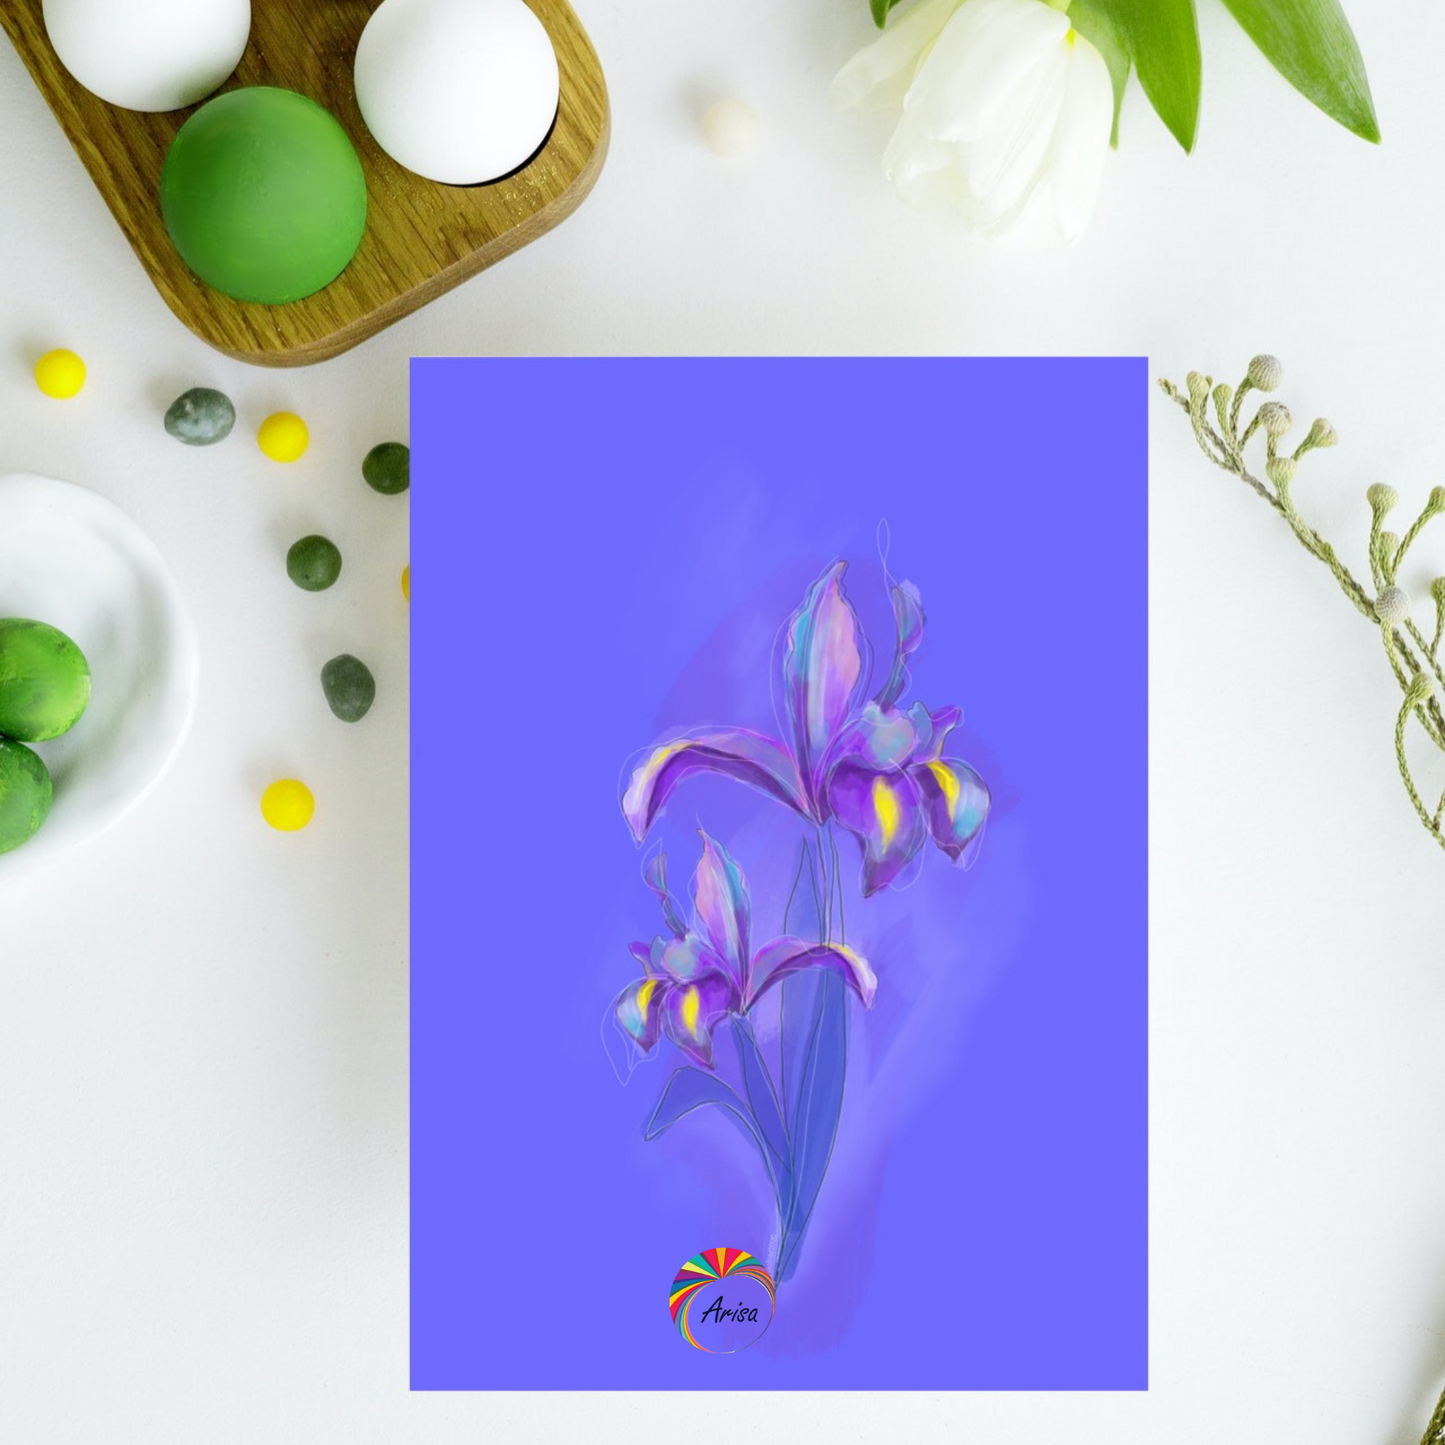 "IRIS" Greeting Card by ArisaTeam ideal as an Easter card.